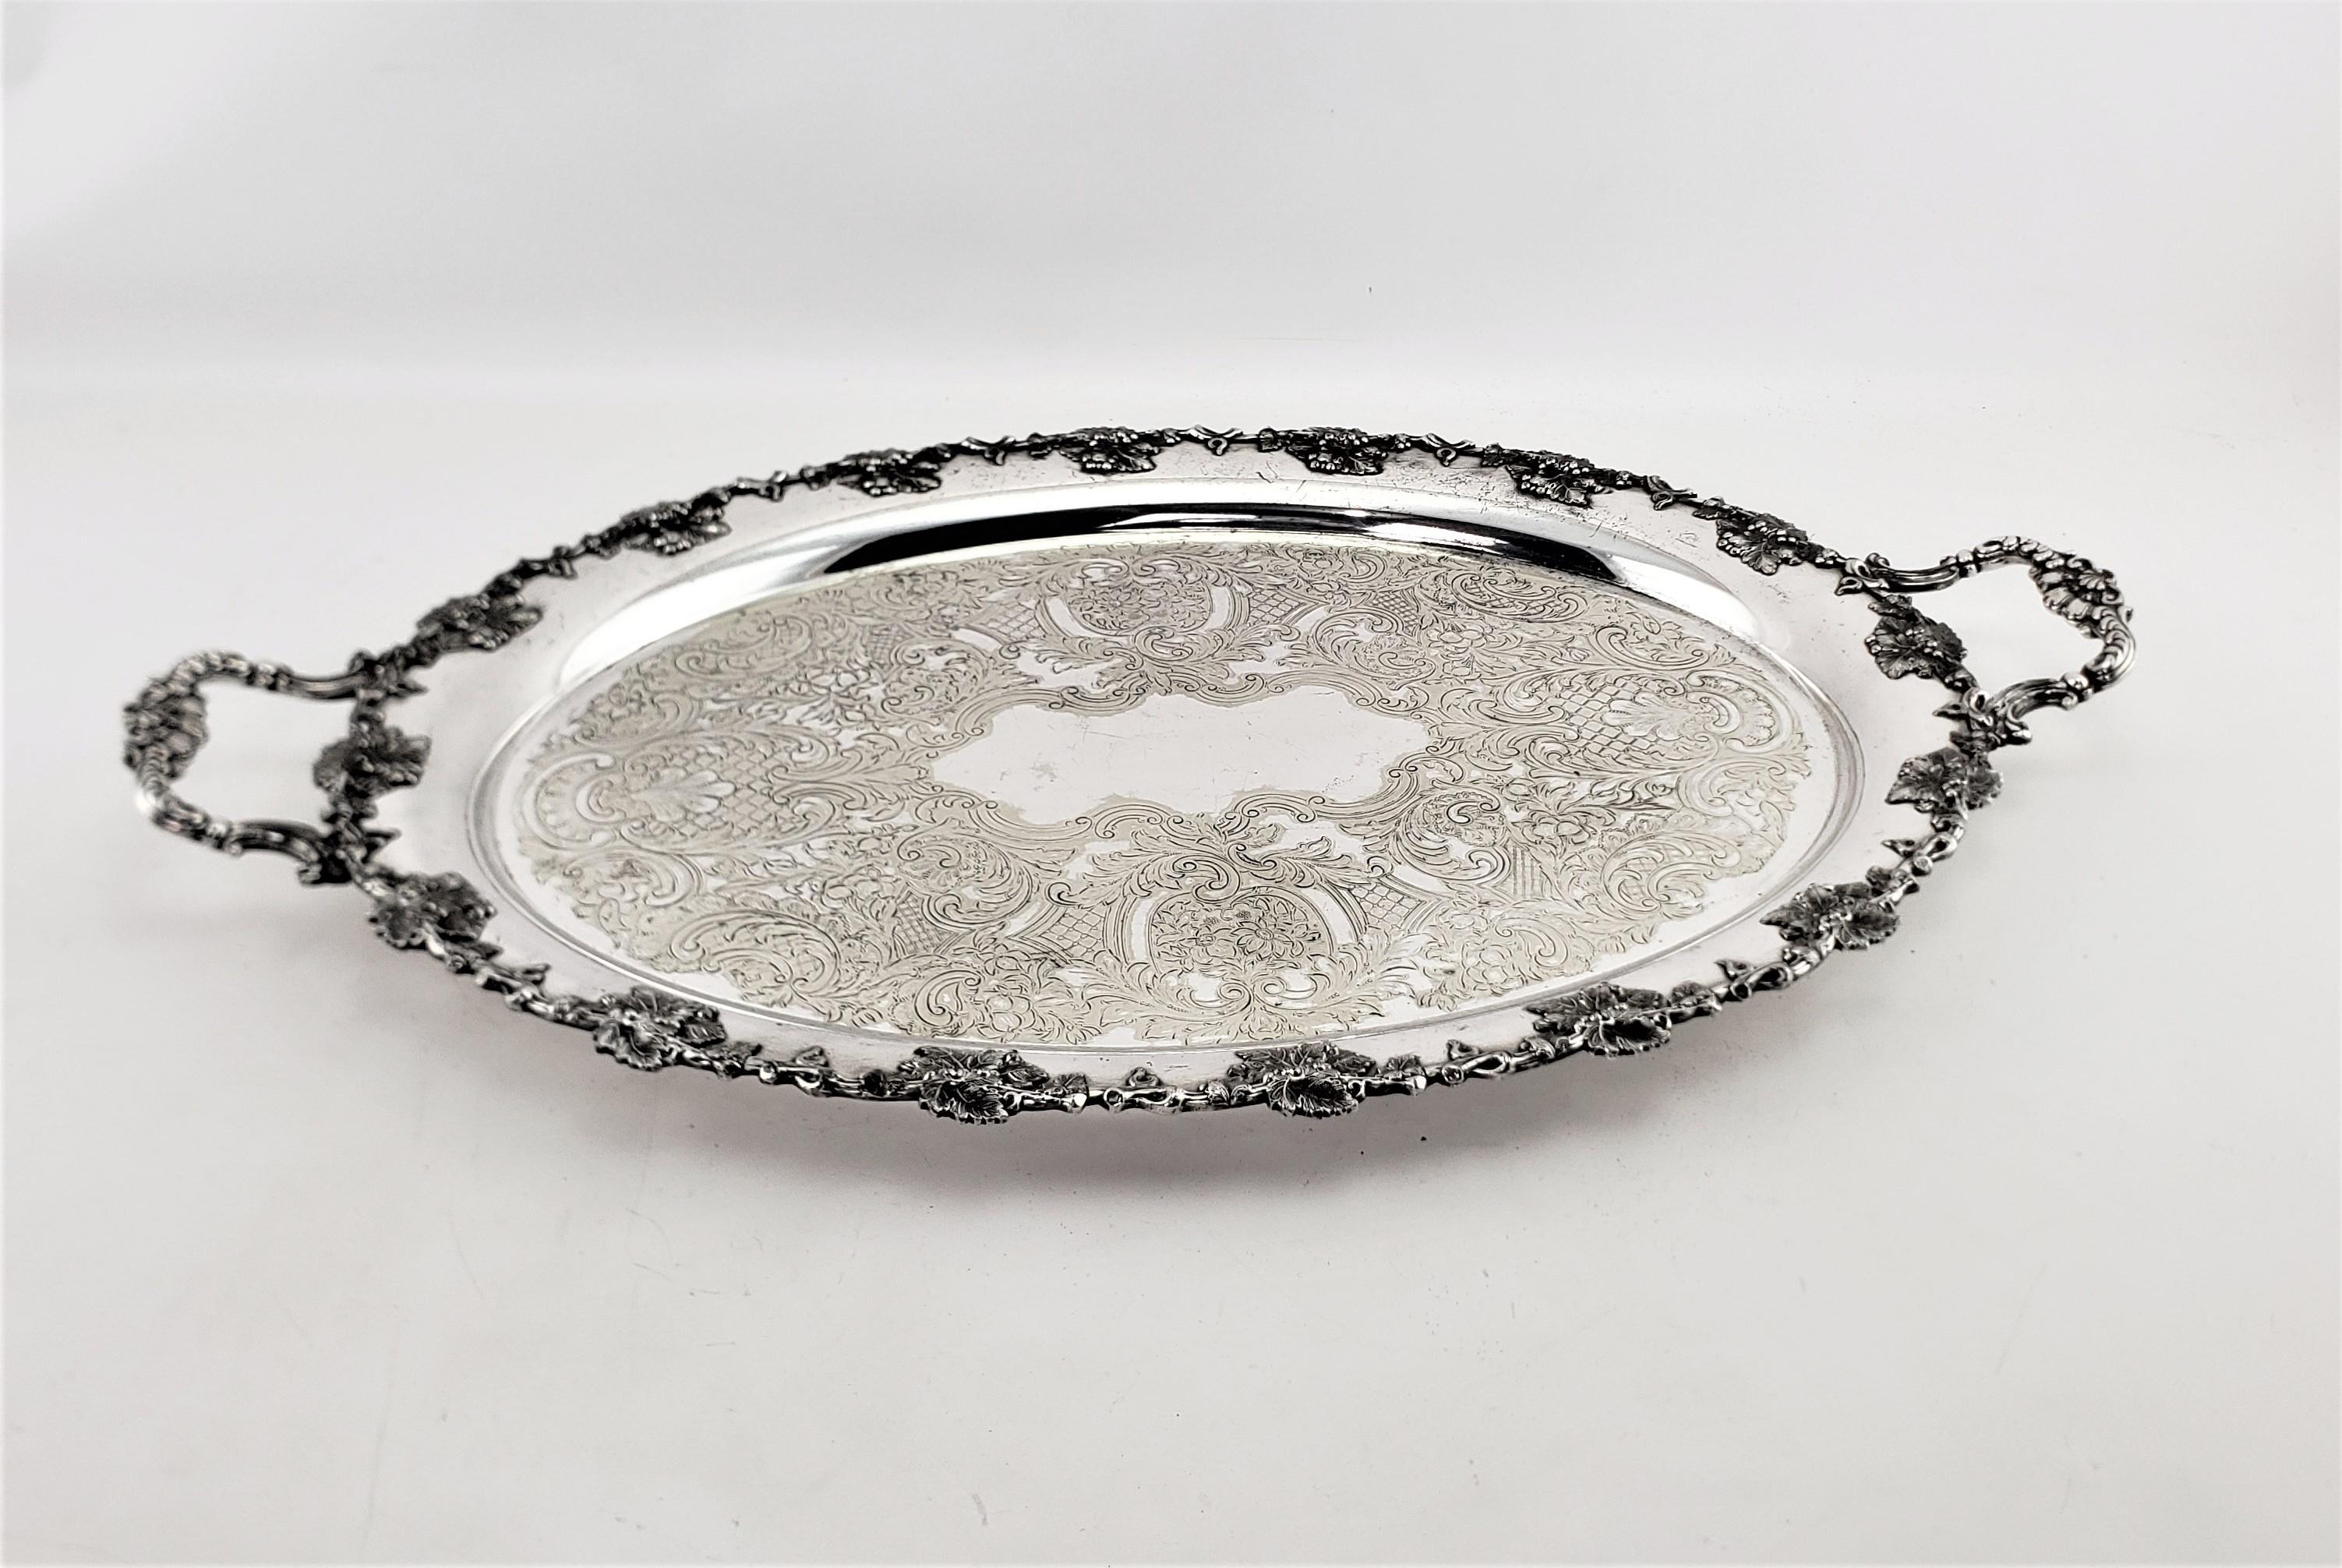 This large antique oval silver plated serving tray was made by the renowned Barker-Ellis Silver Company of England is approximately 1900 in a Victorian style. This oval tray is adorned with ornate applied decoration of leaves and berries which is